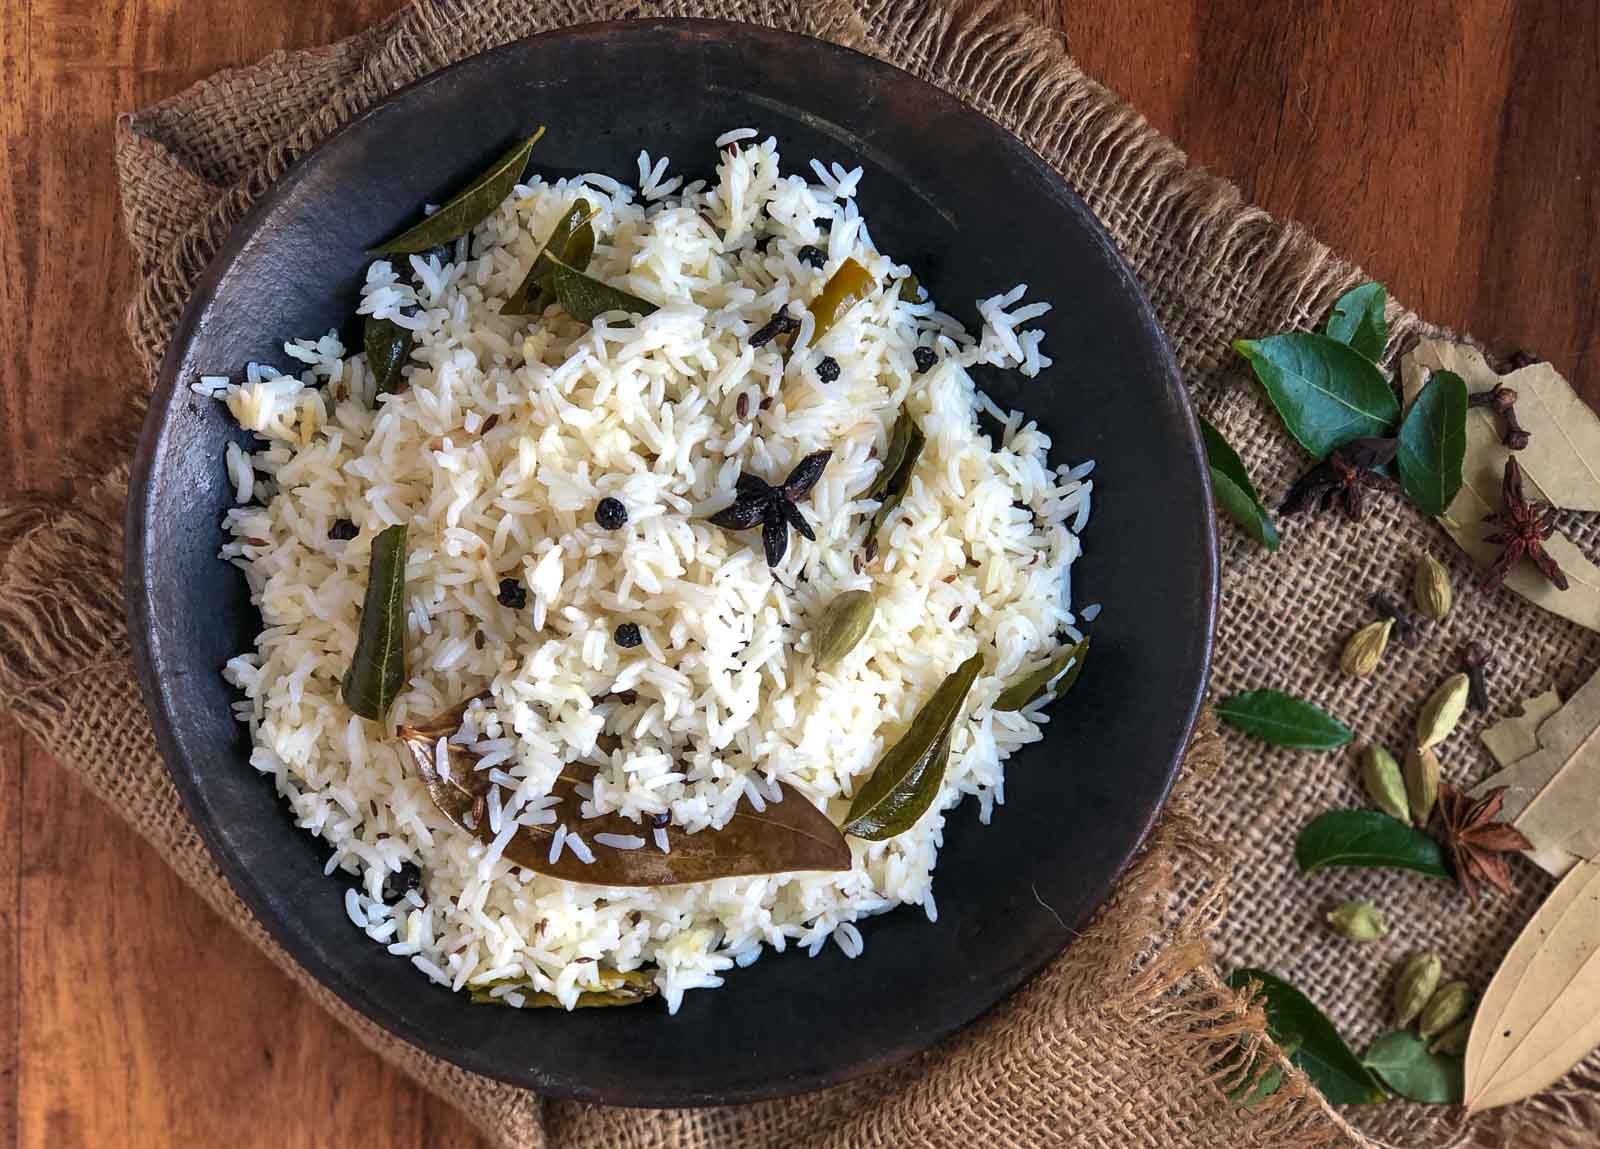 Dhaba Style Spicy Ghee Rice Recipe Made From Whole Spices